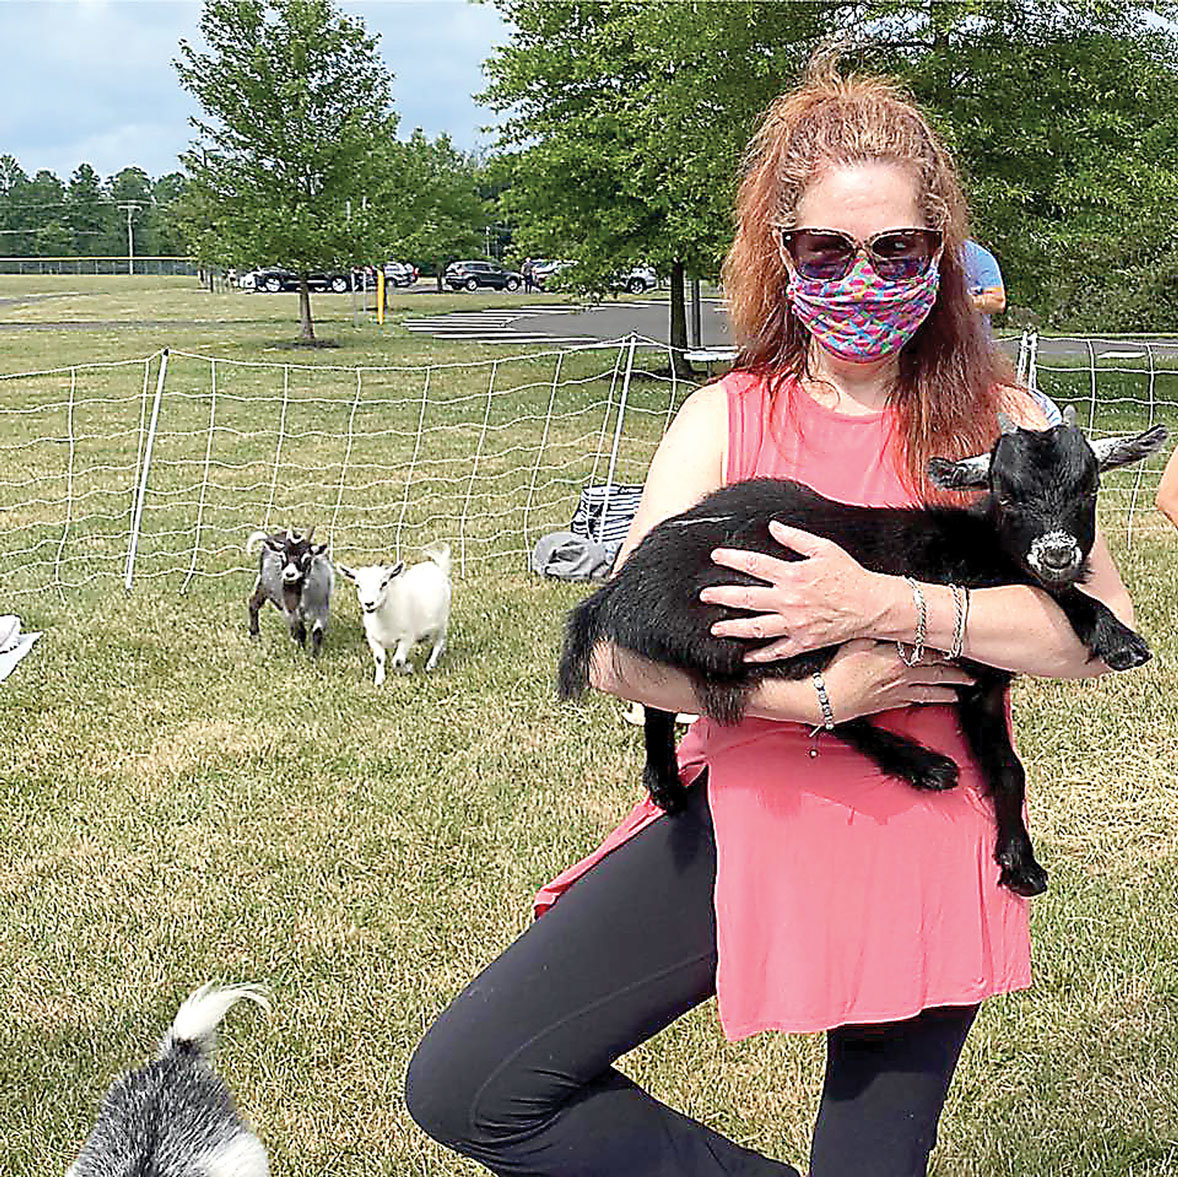 Meg McSweeney practices “Goat Yoga,” one of several programs being offered this month to bid farewell to the David Library.